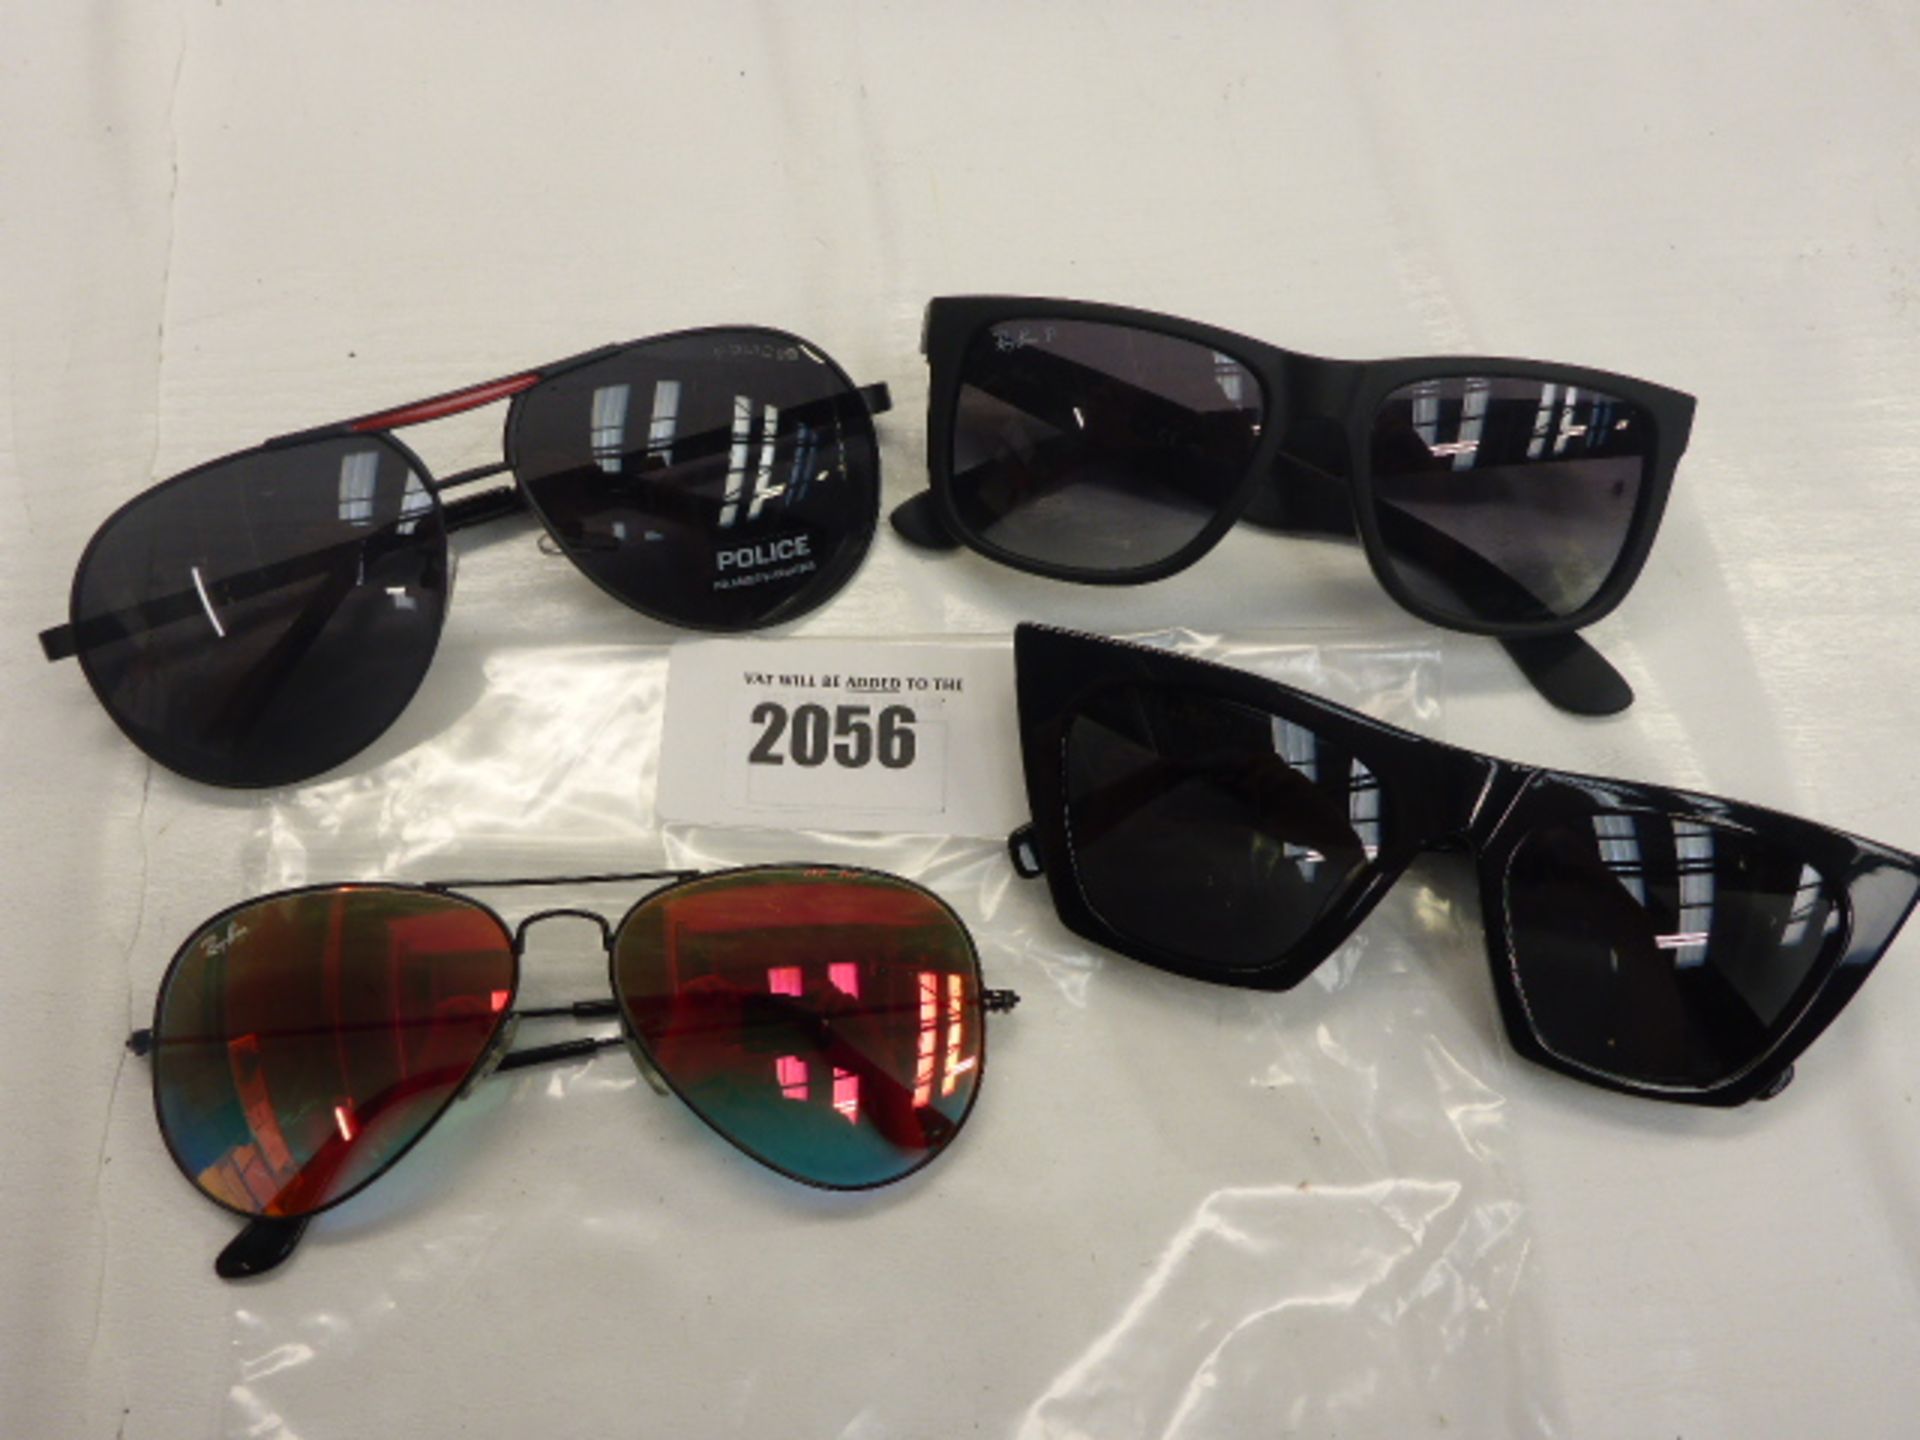 4 pairs of sunglasses, 2x Ray-Ban, Police and Celine Paris